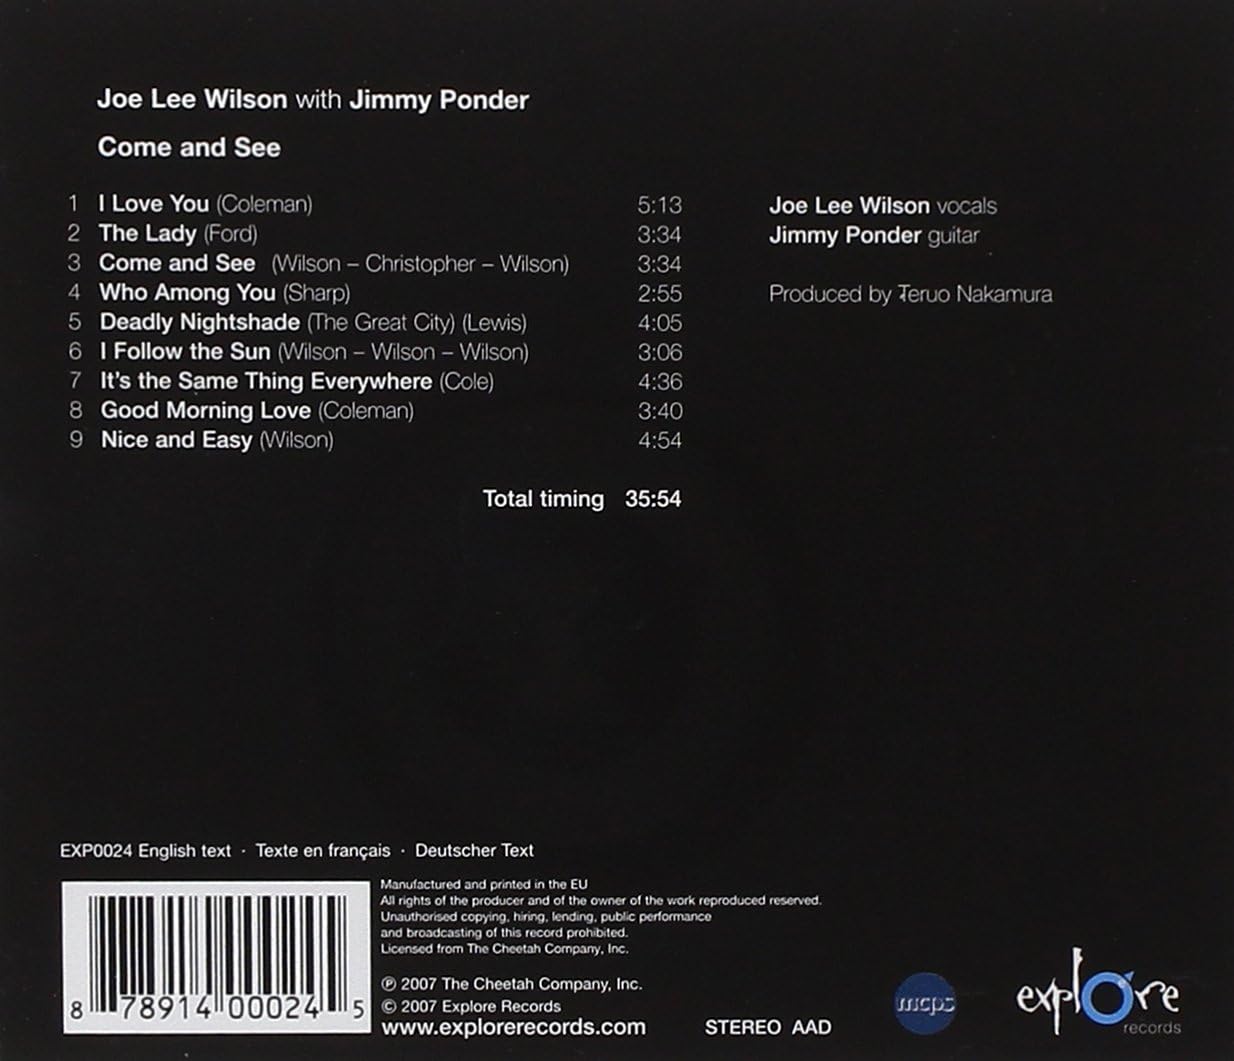 USED CD - Joe Lee Wilson with Jimmy Ponder - Come And See